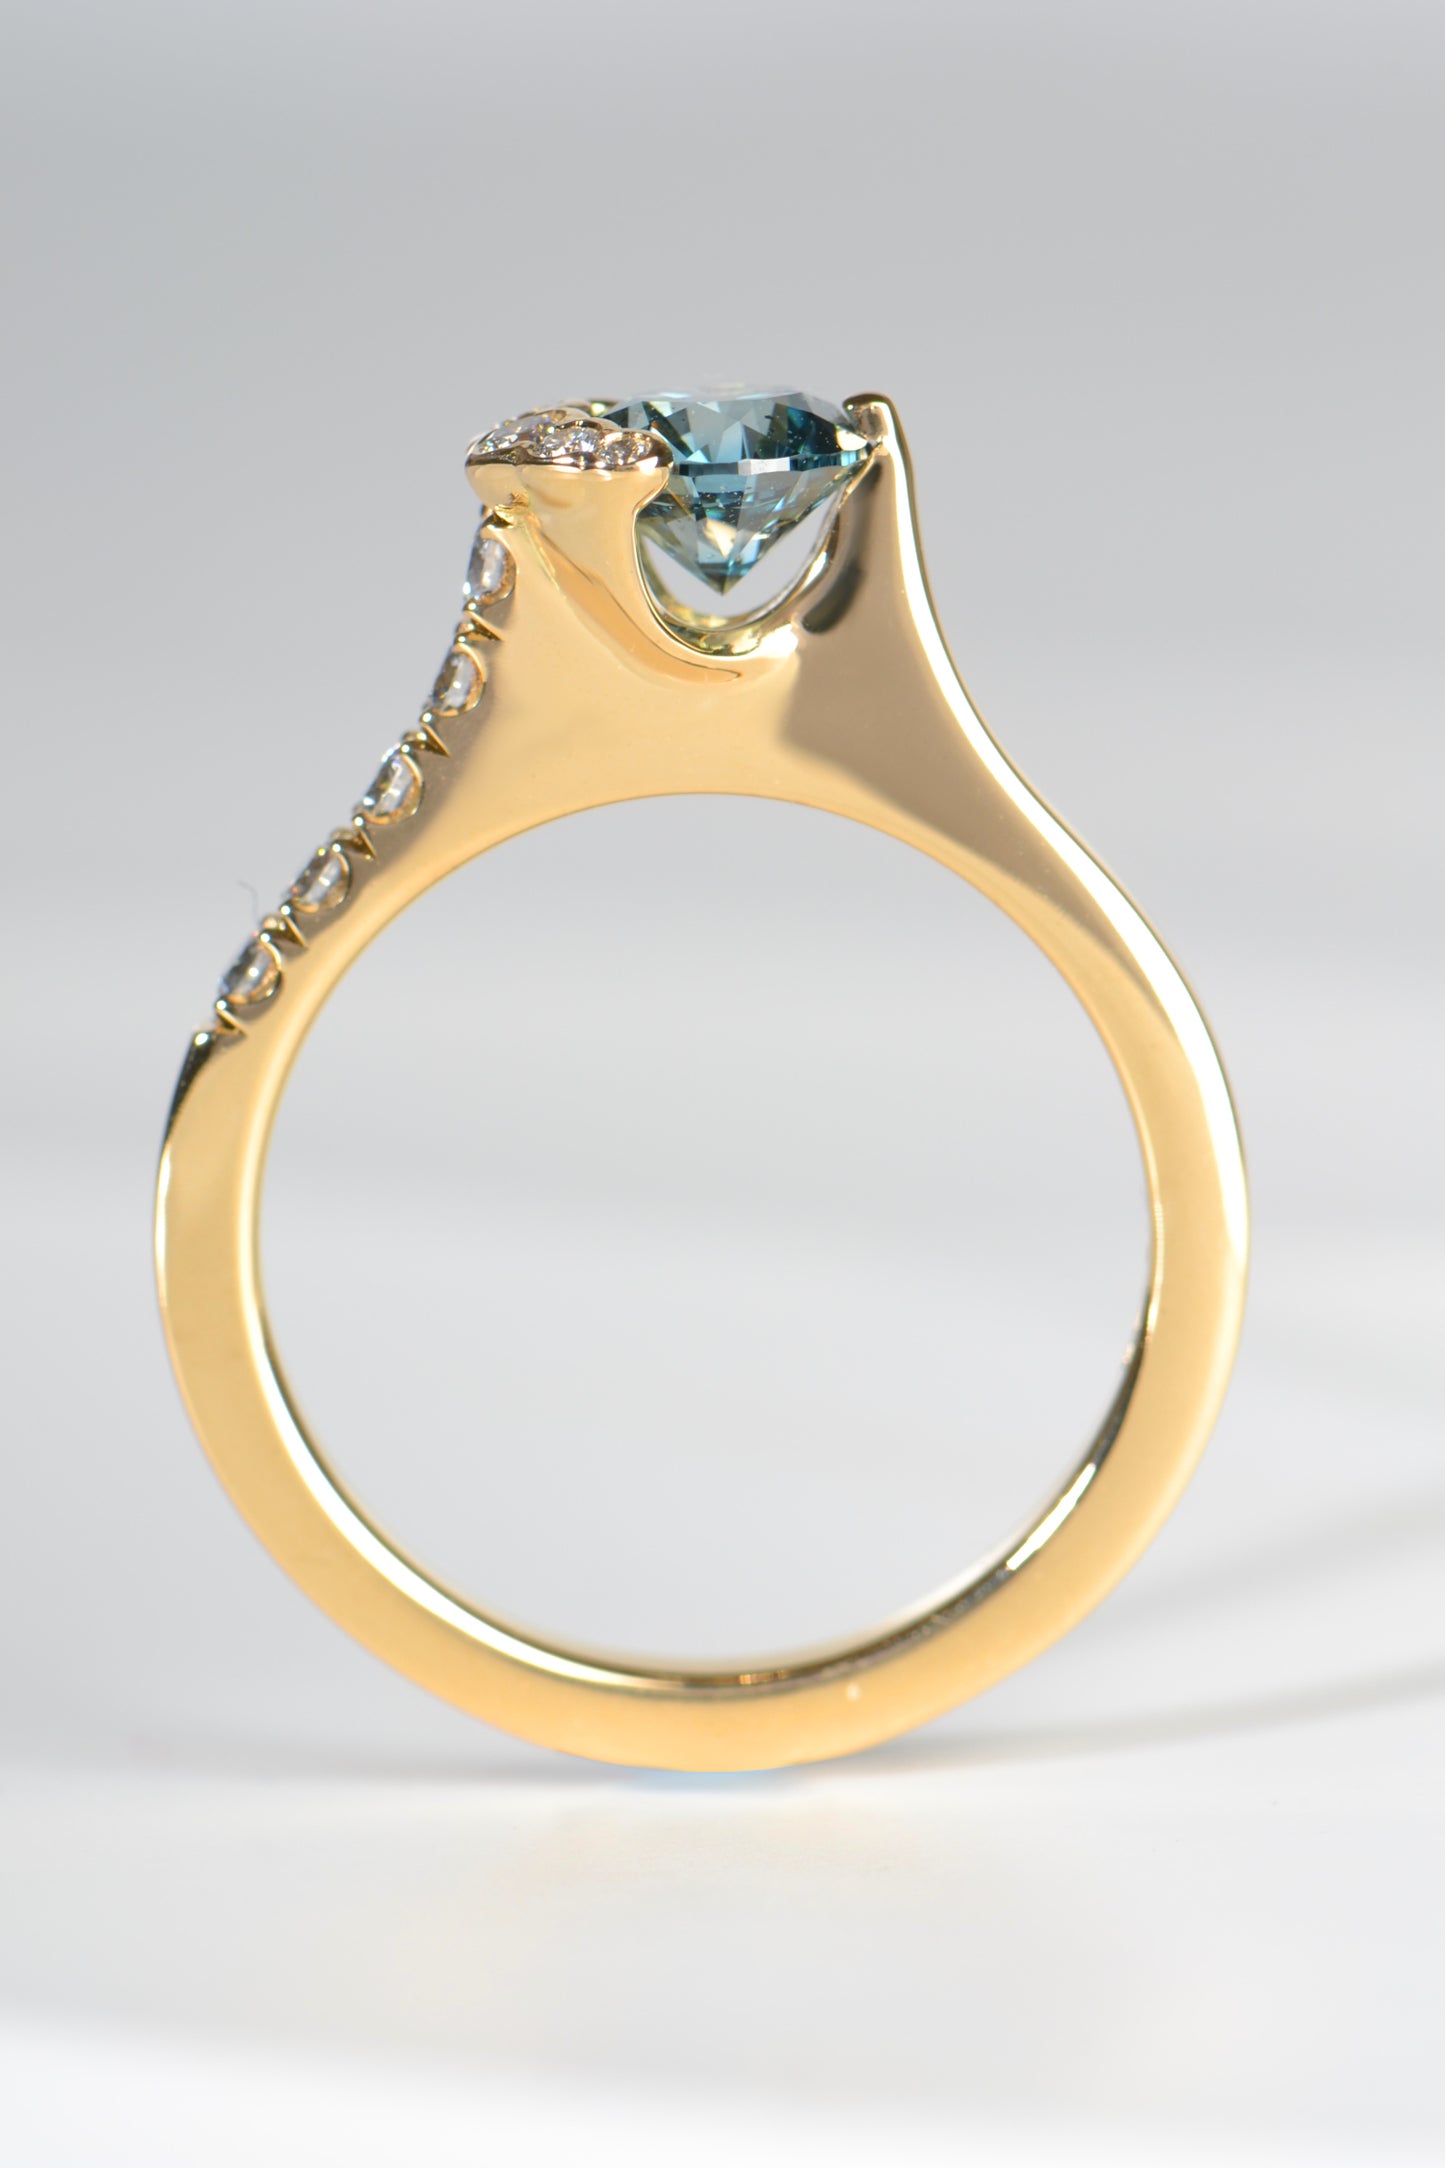 designer engagement ring that you can see the point of the diamond side on, like a tension set diamond ring